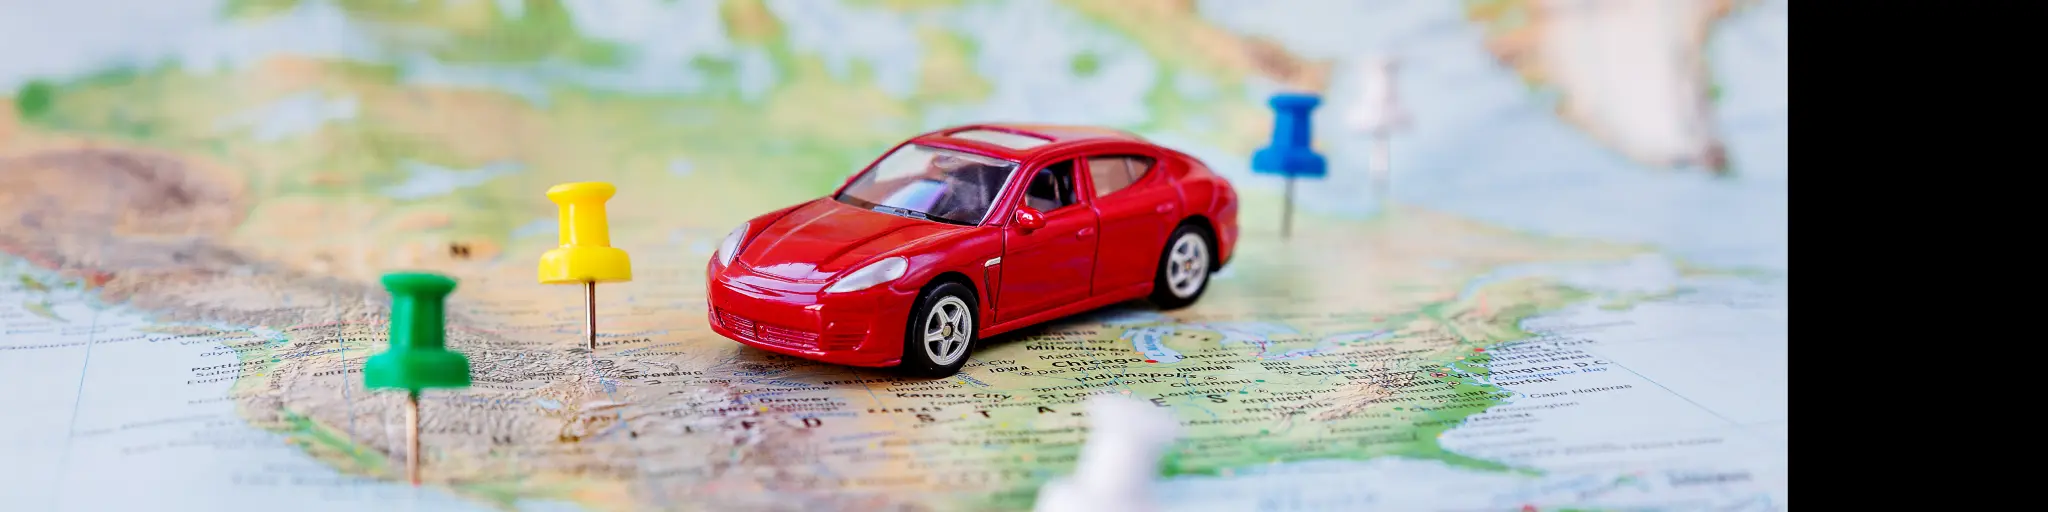 A full guide to planning your first road trip with tips and advice